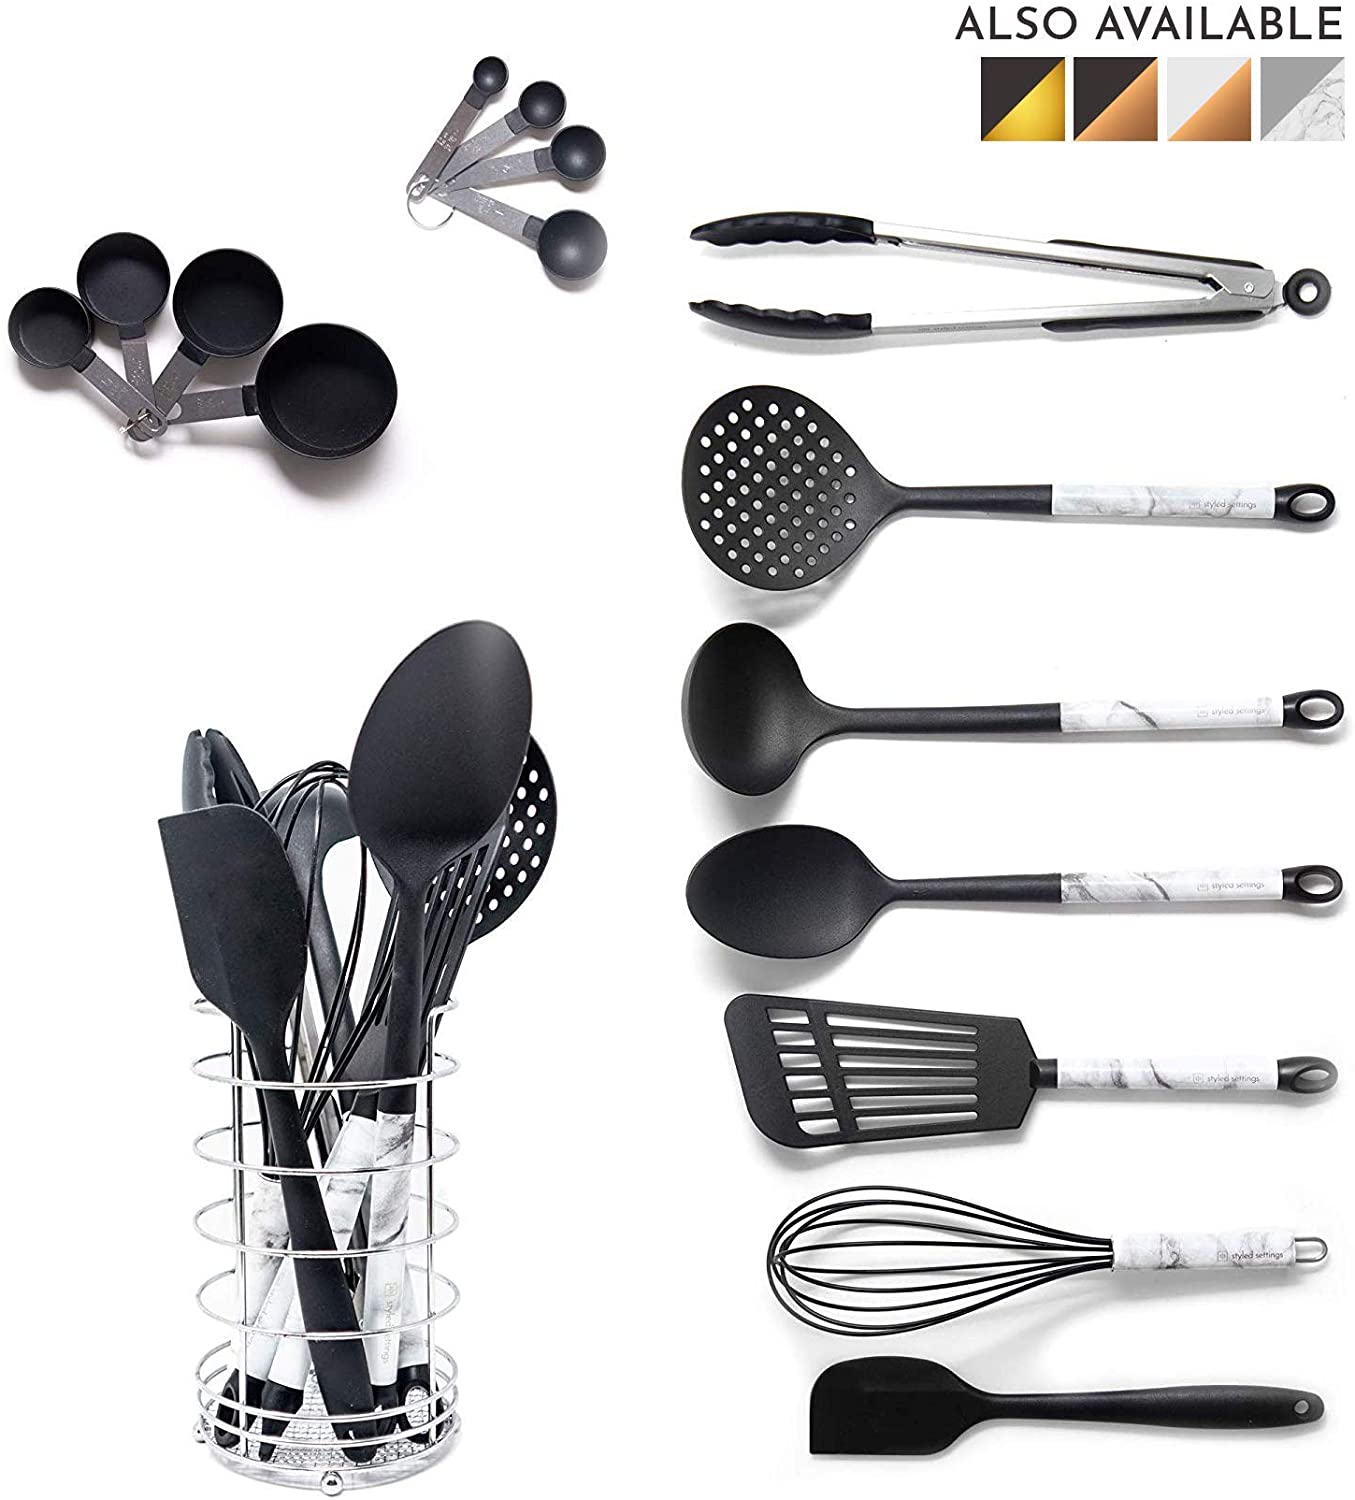 Styled Settings White & Gold Nylon Cooking Utensils with Holder and  Measuring Cups & Spoons 